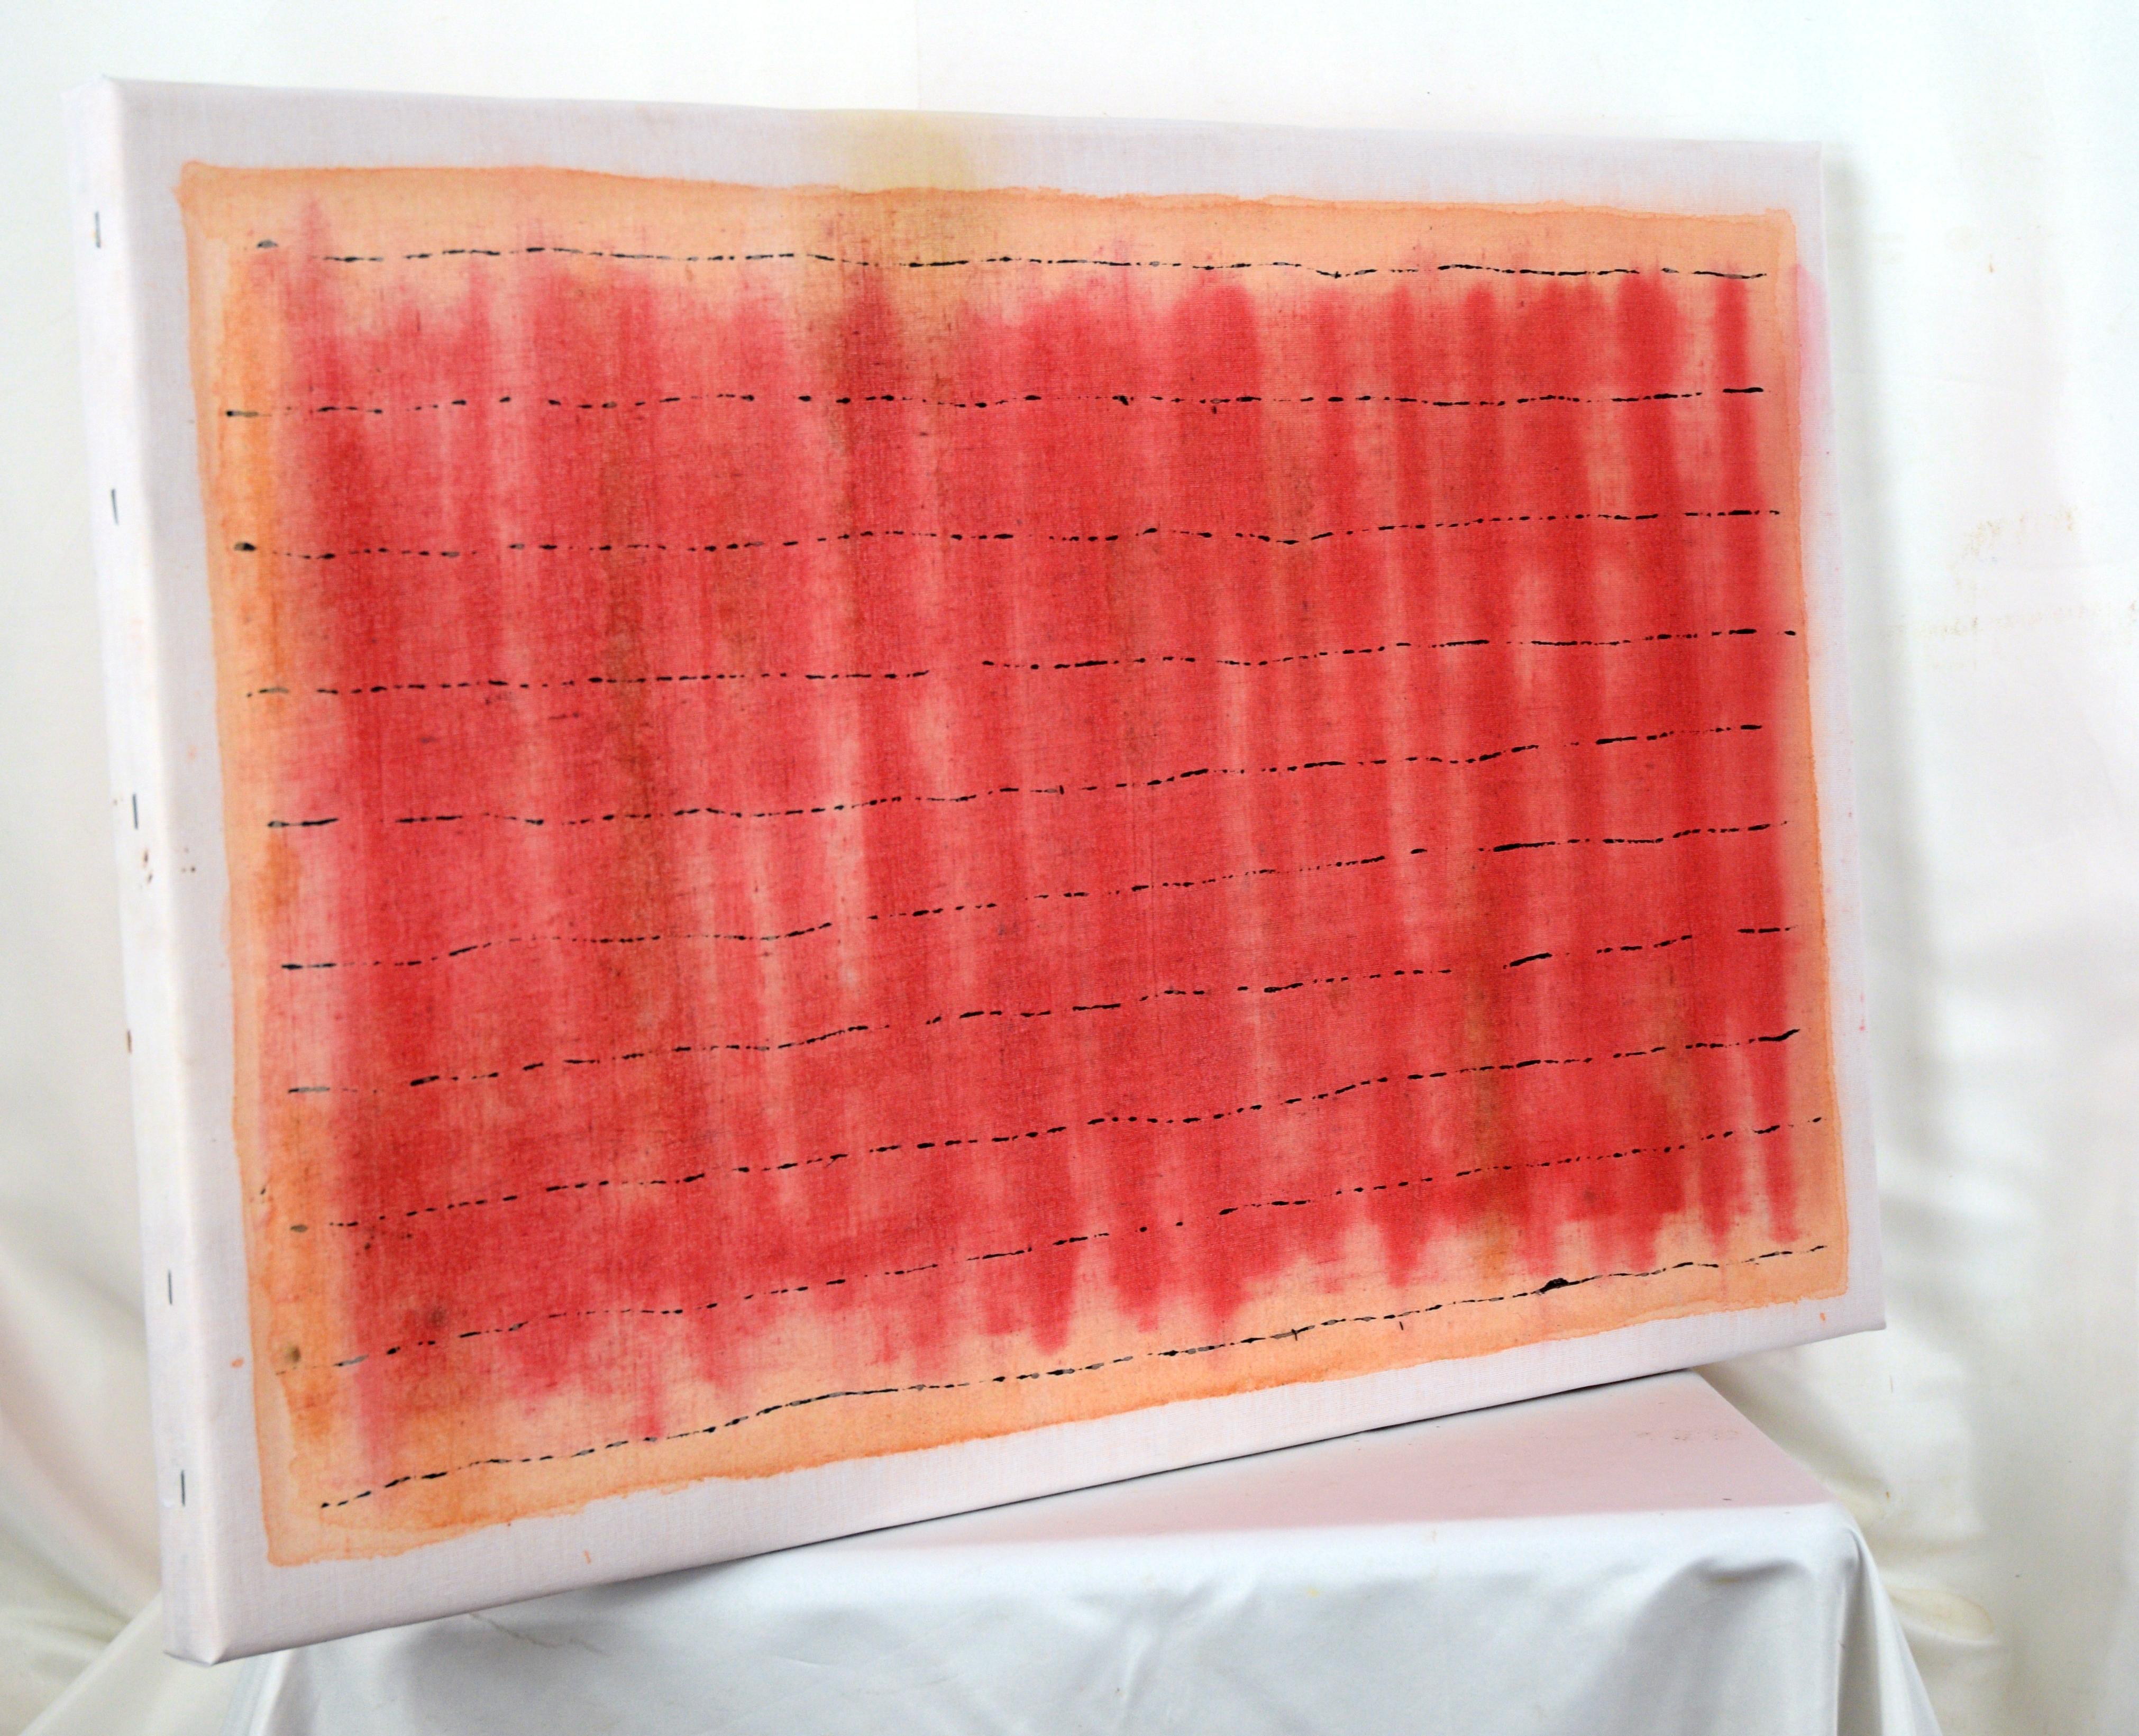 Black Lines Across a Red Field - Abstract Composition on Starched Linen For Sale 4